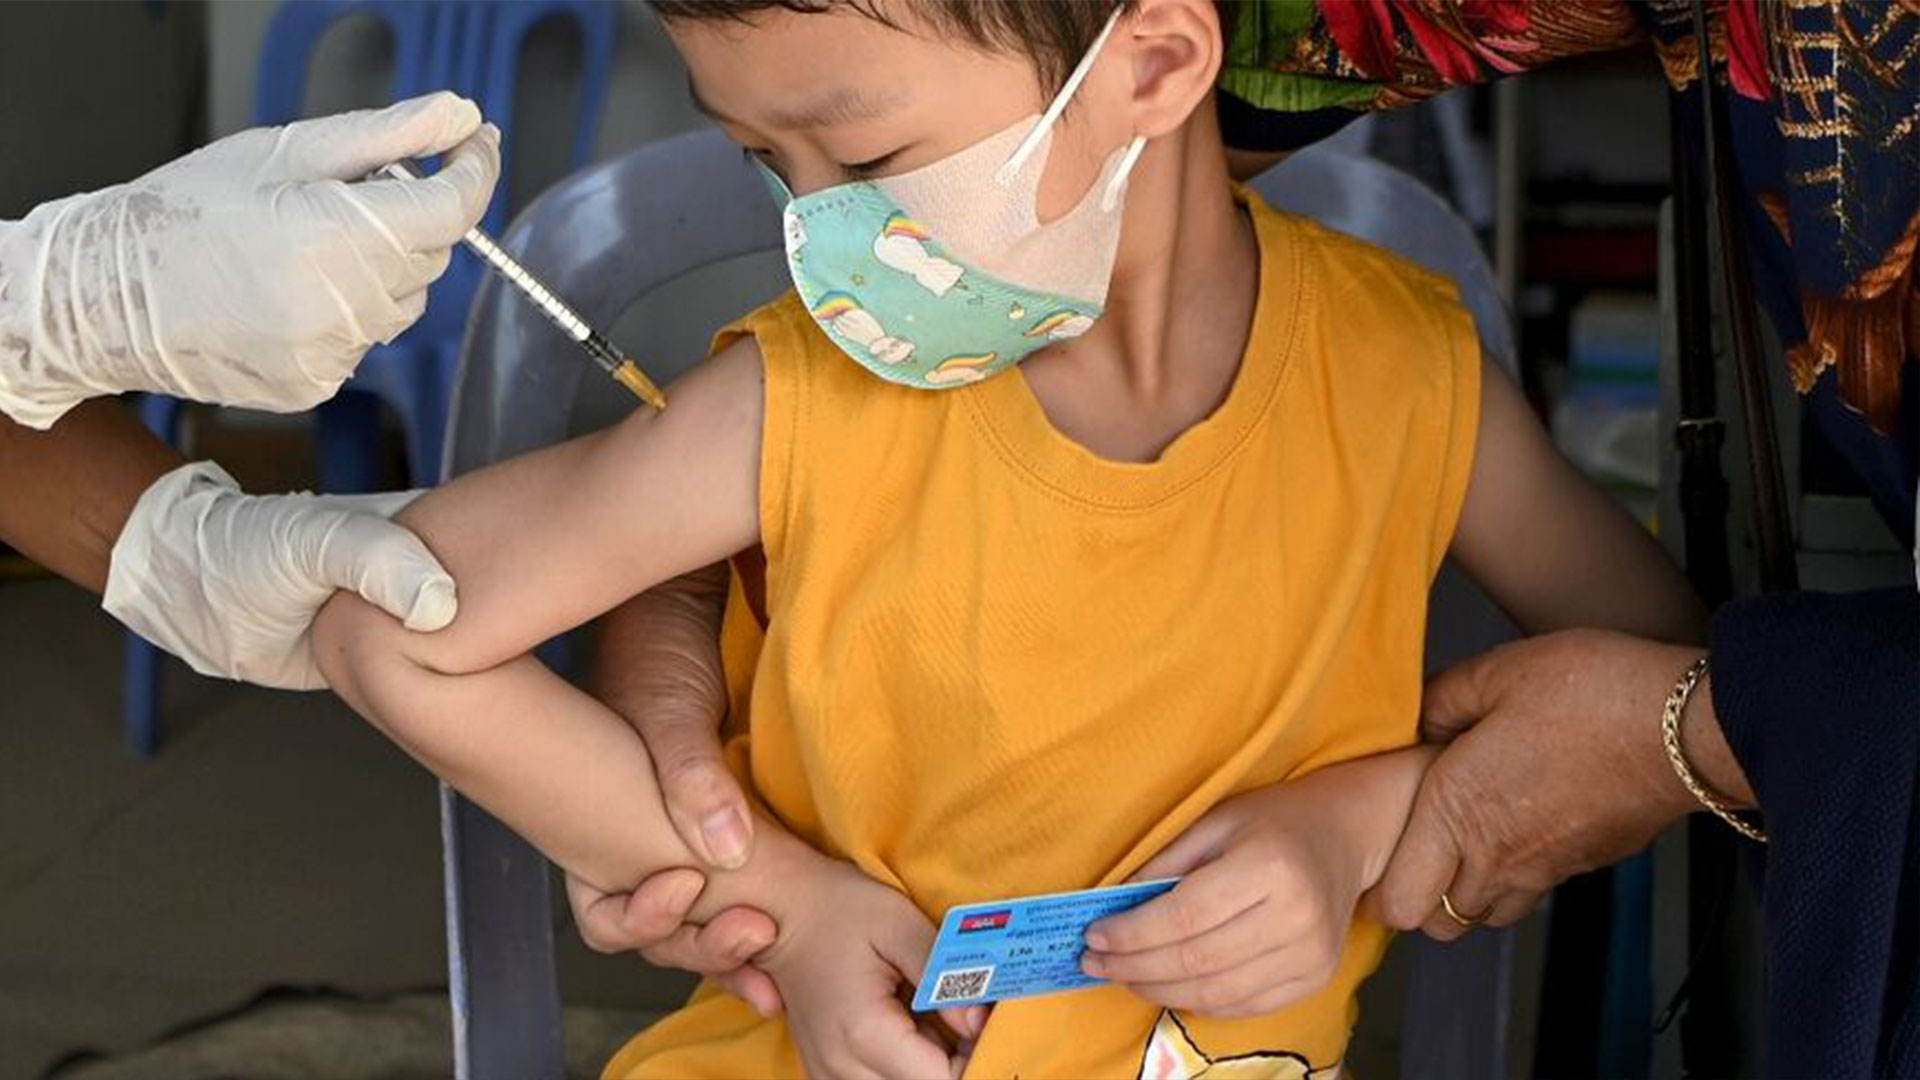  Nearly 600,000 additional deaths could have been prevented if the WHO's goal of vaccinating 40 percent of every country's population by the end of 2021 had been met - TANG CHHIN Sothy   